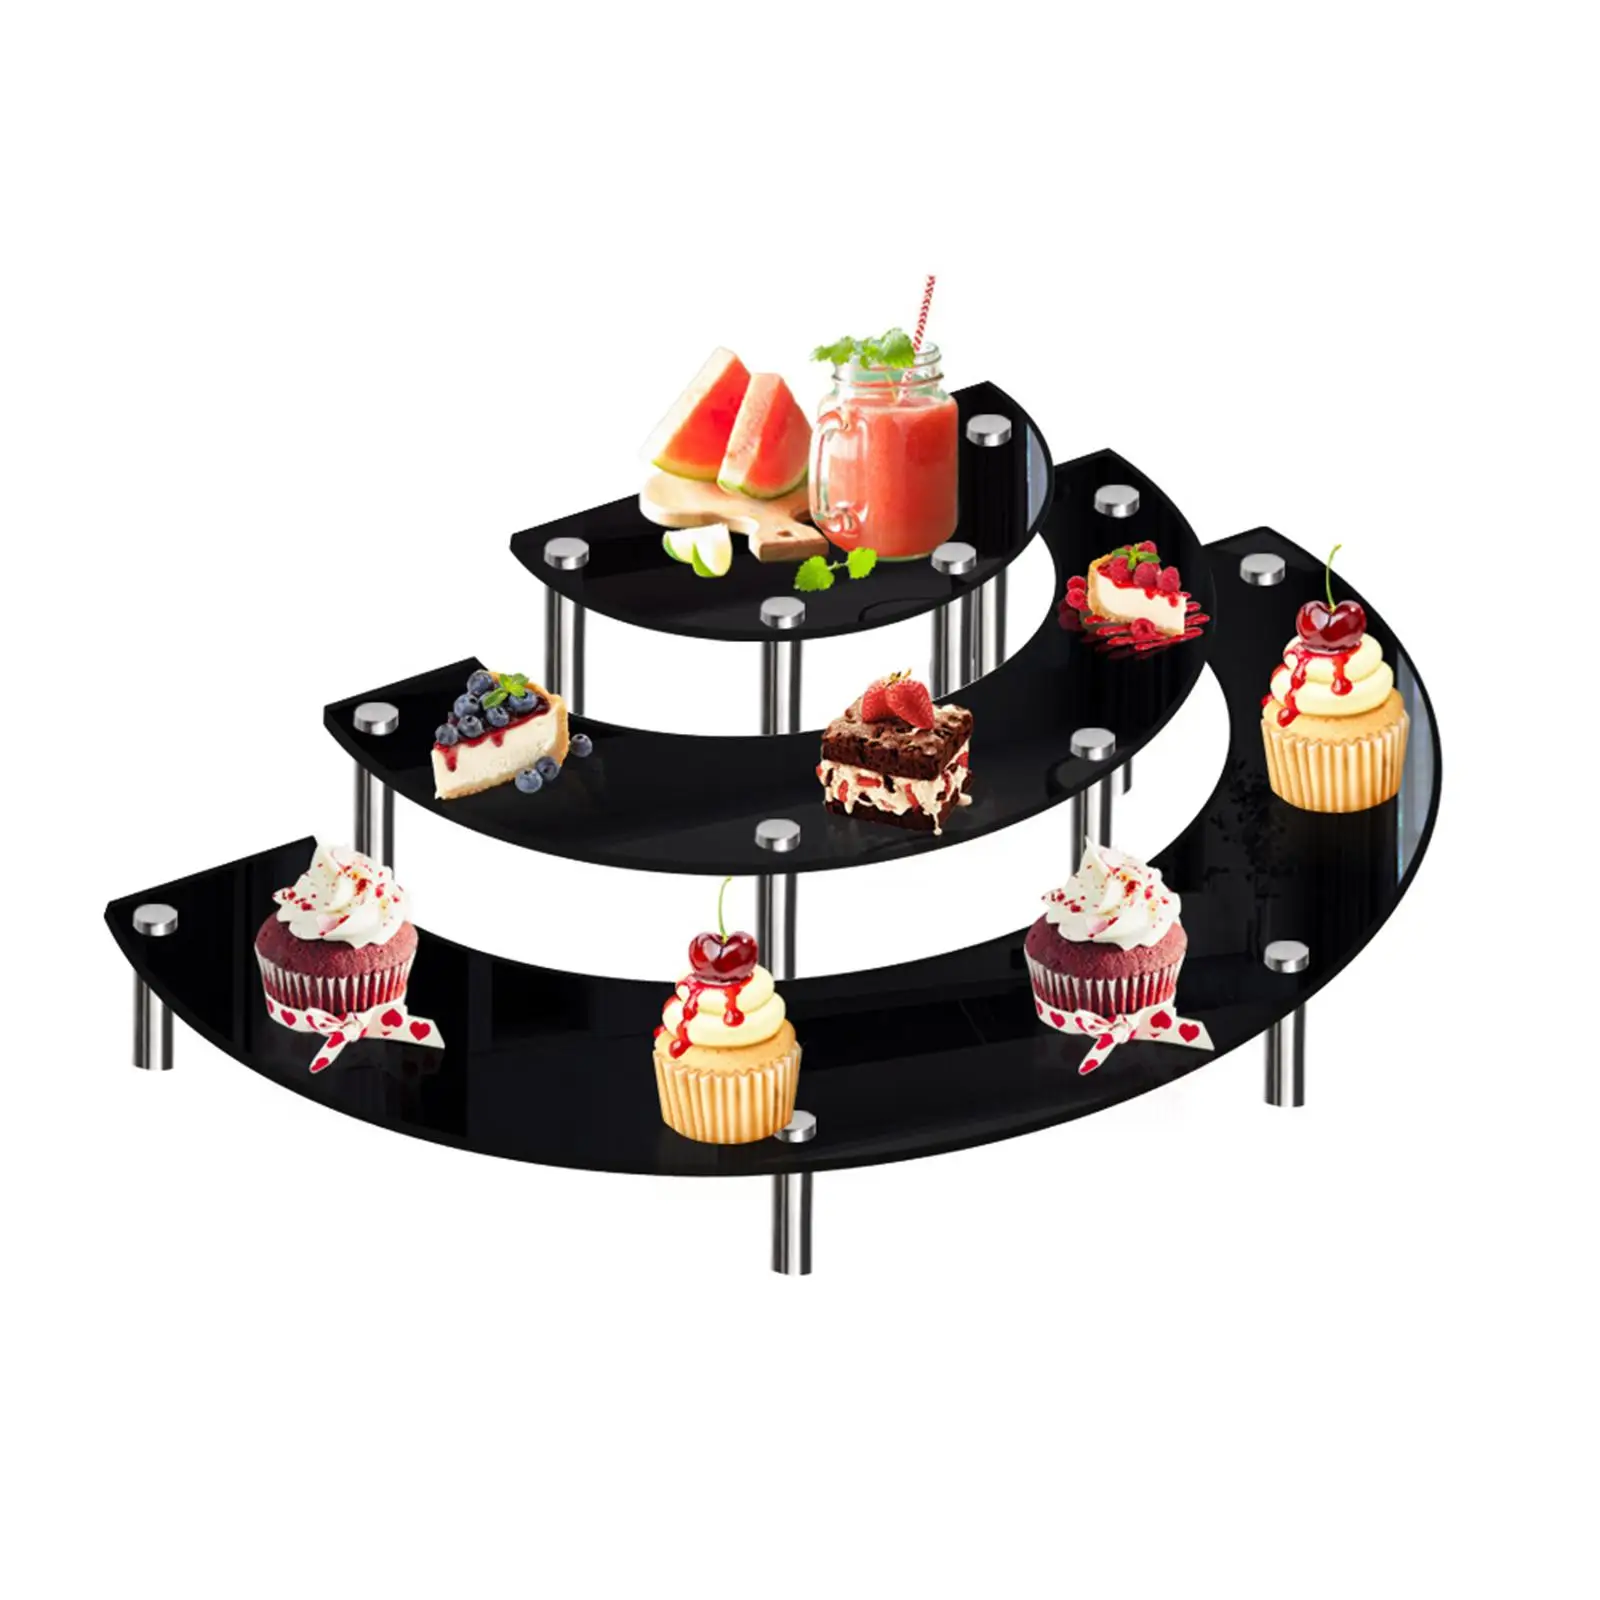 Cupcake Stand 3 Tier Retail Step Shelf Display Stand for Perfume Appetizers Wedding Figurines Cosmetics